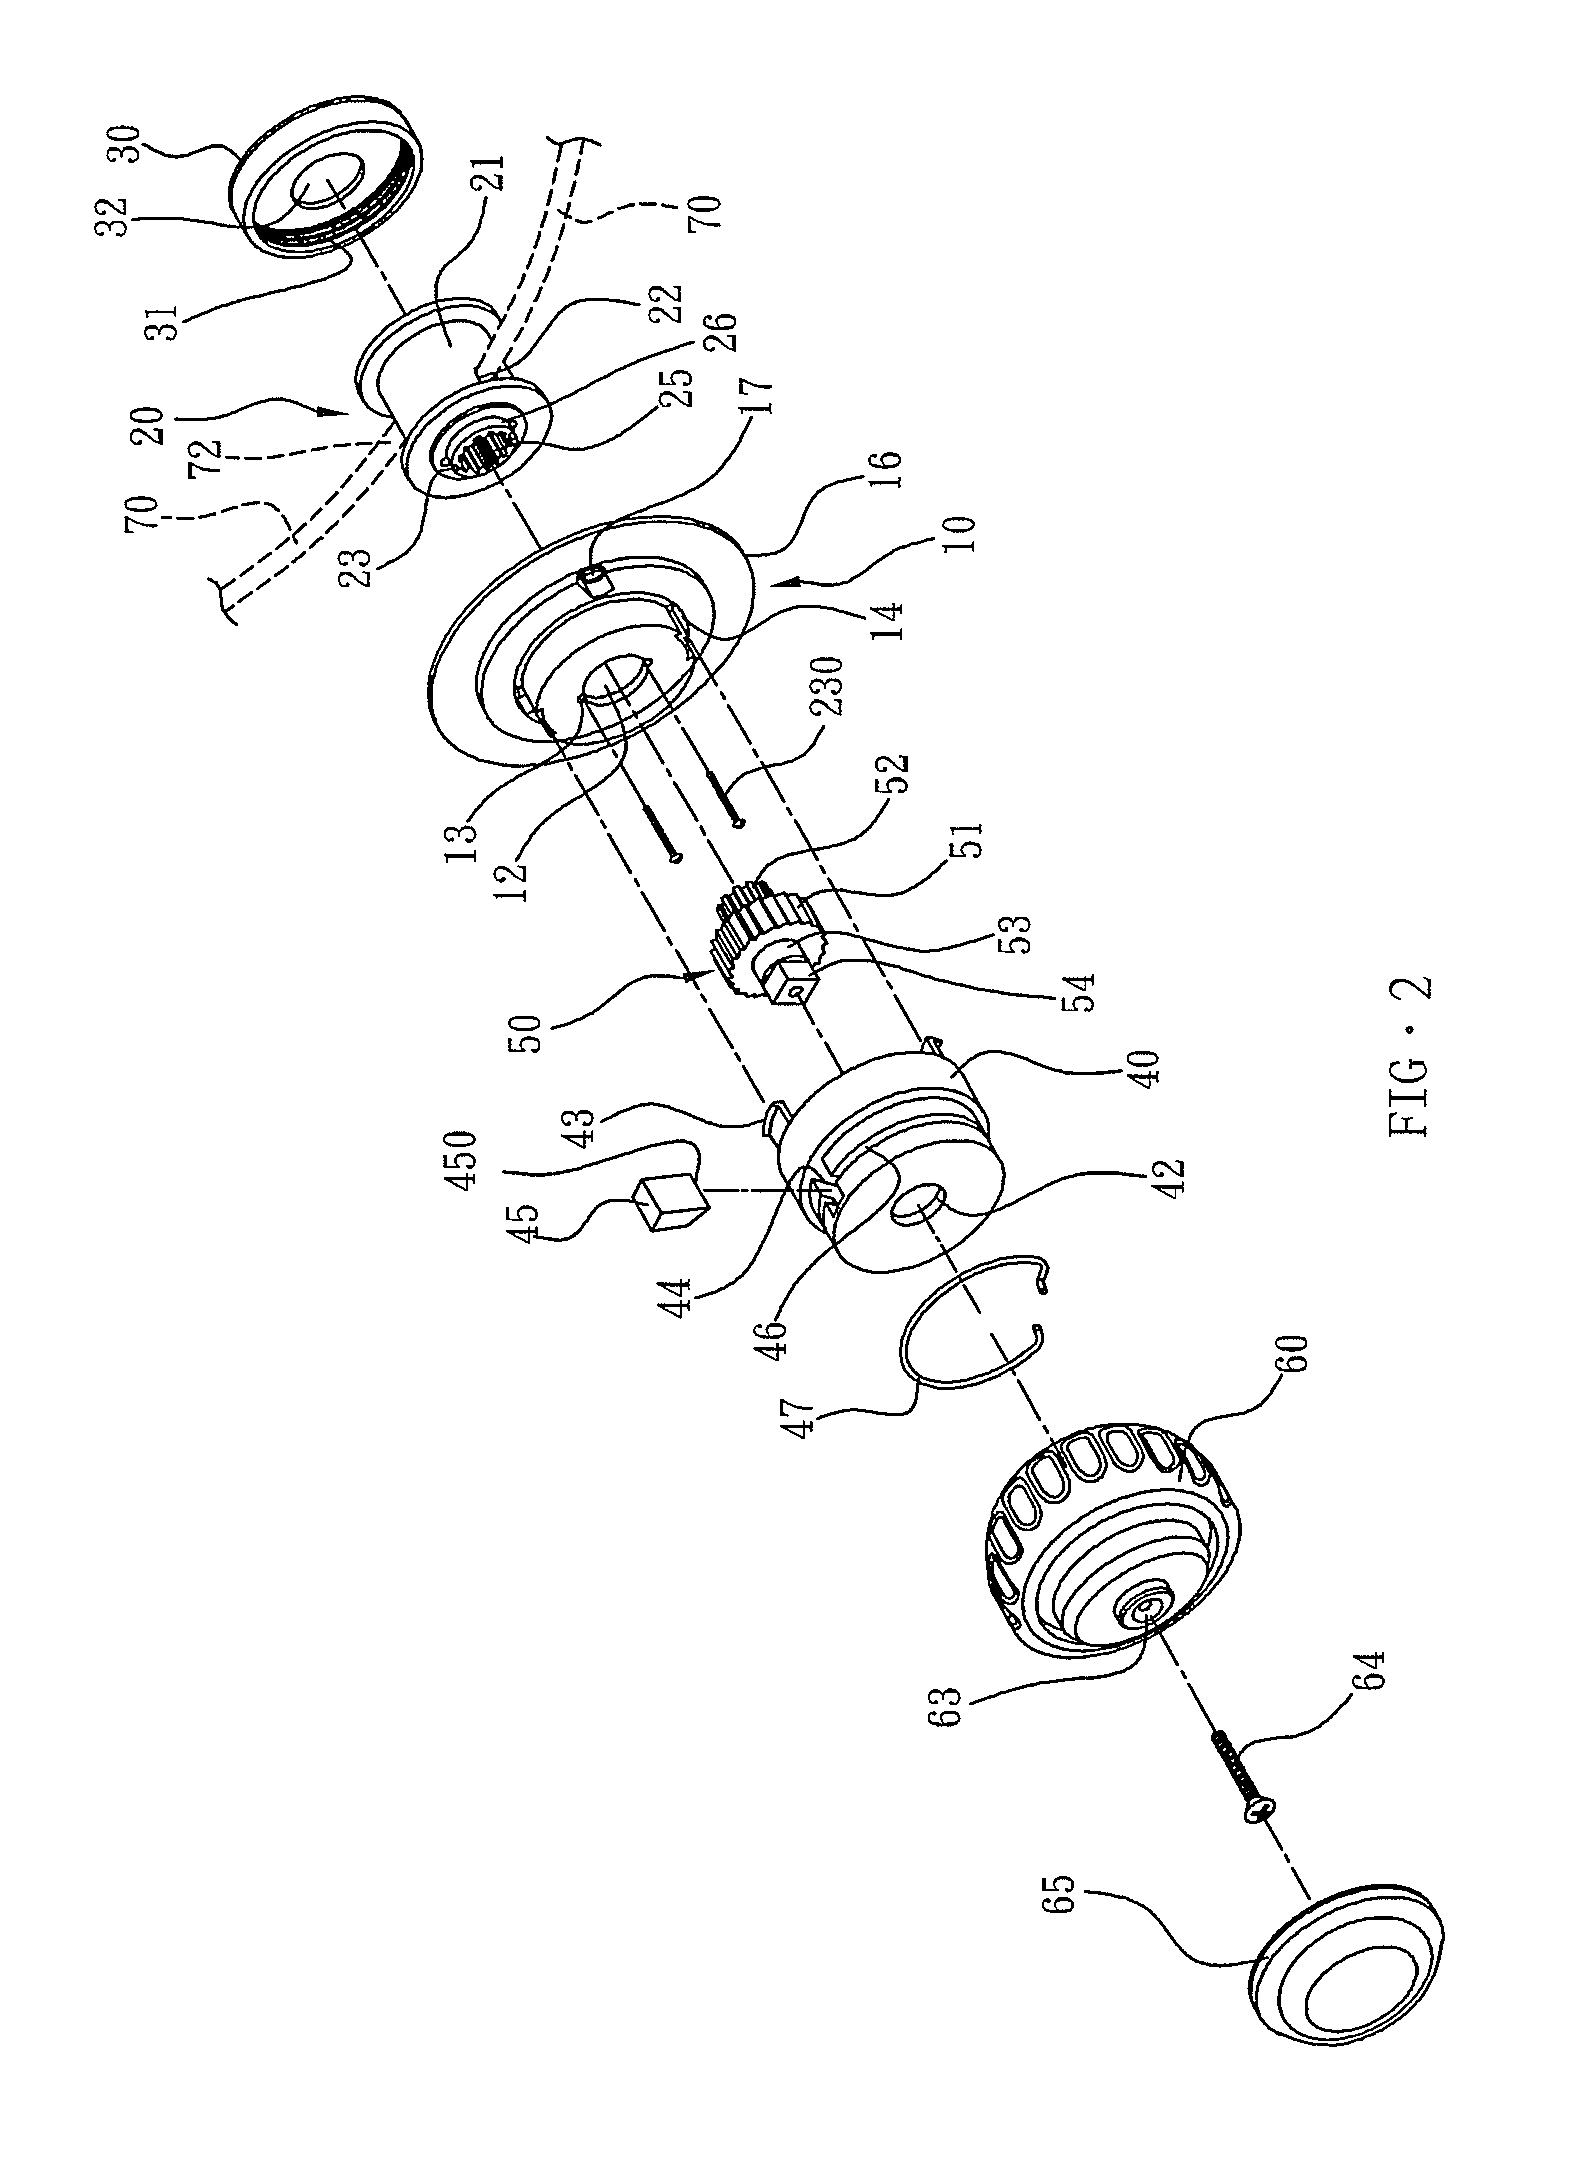 Lace winding device for shoes